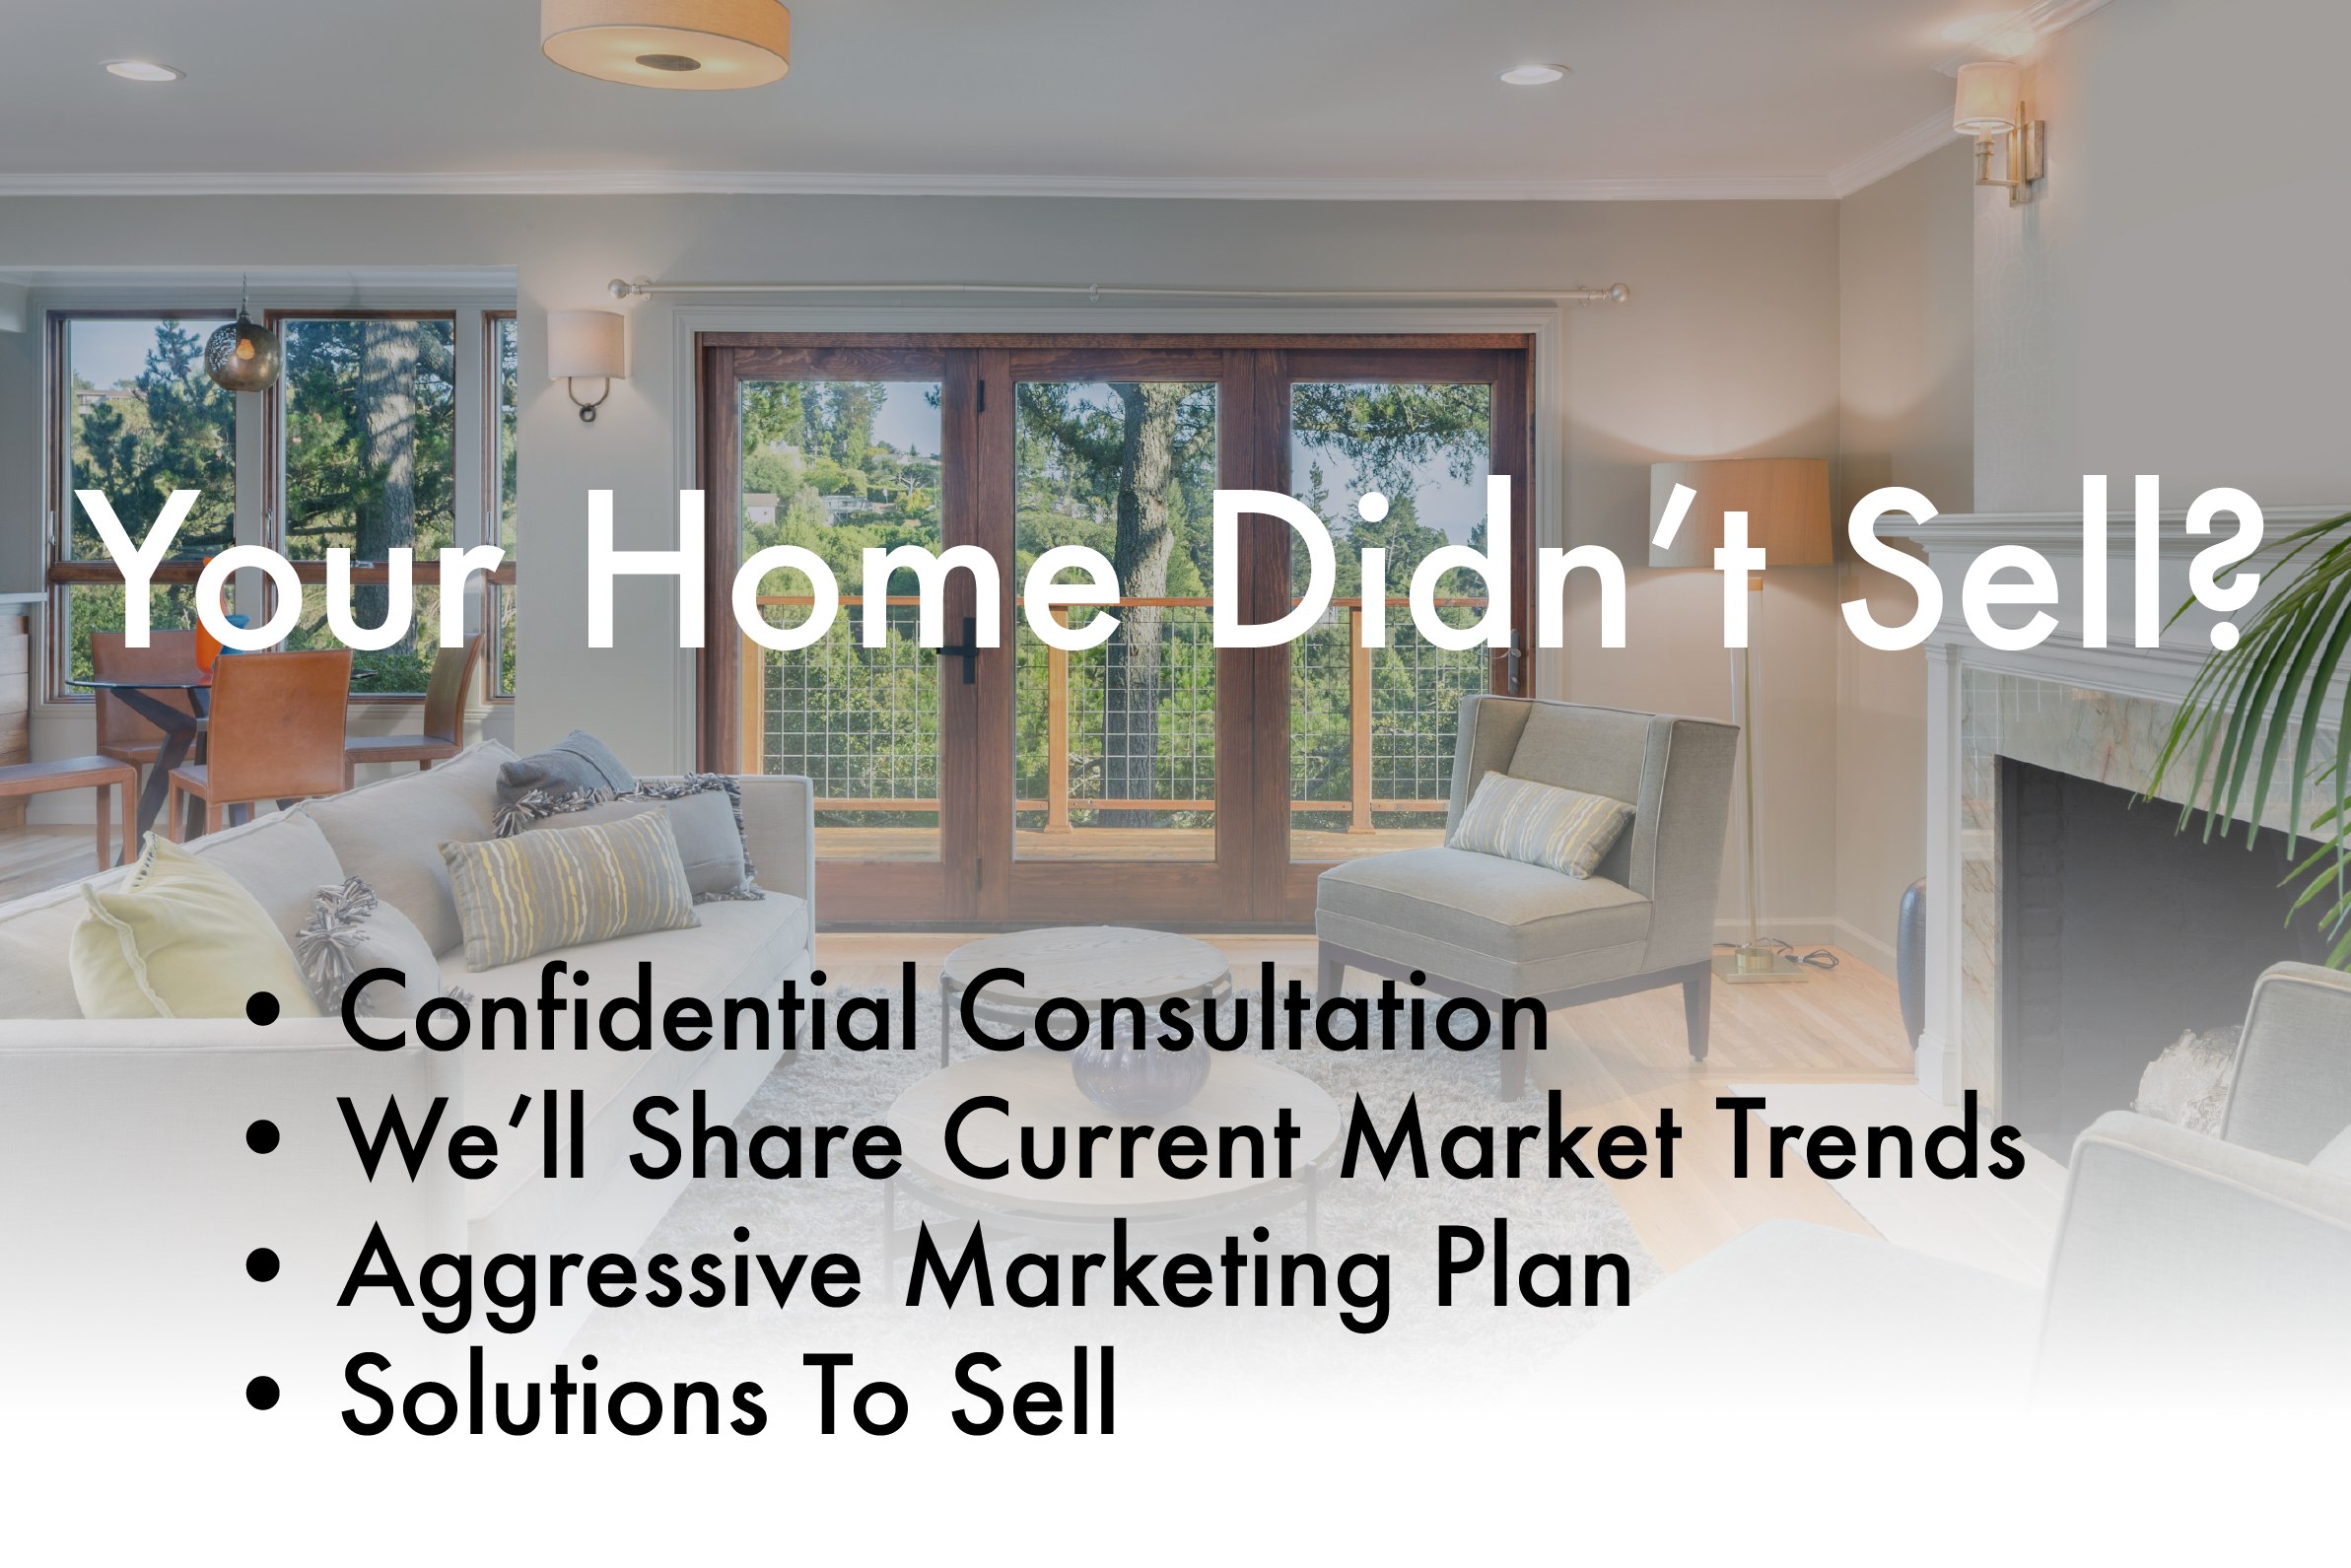 Your Home Didn't Sell?